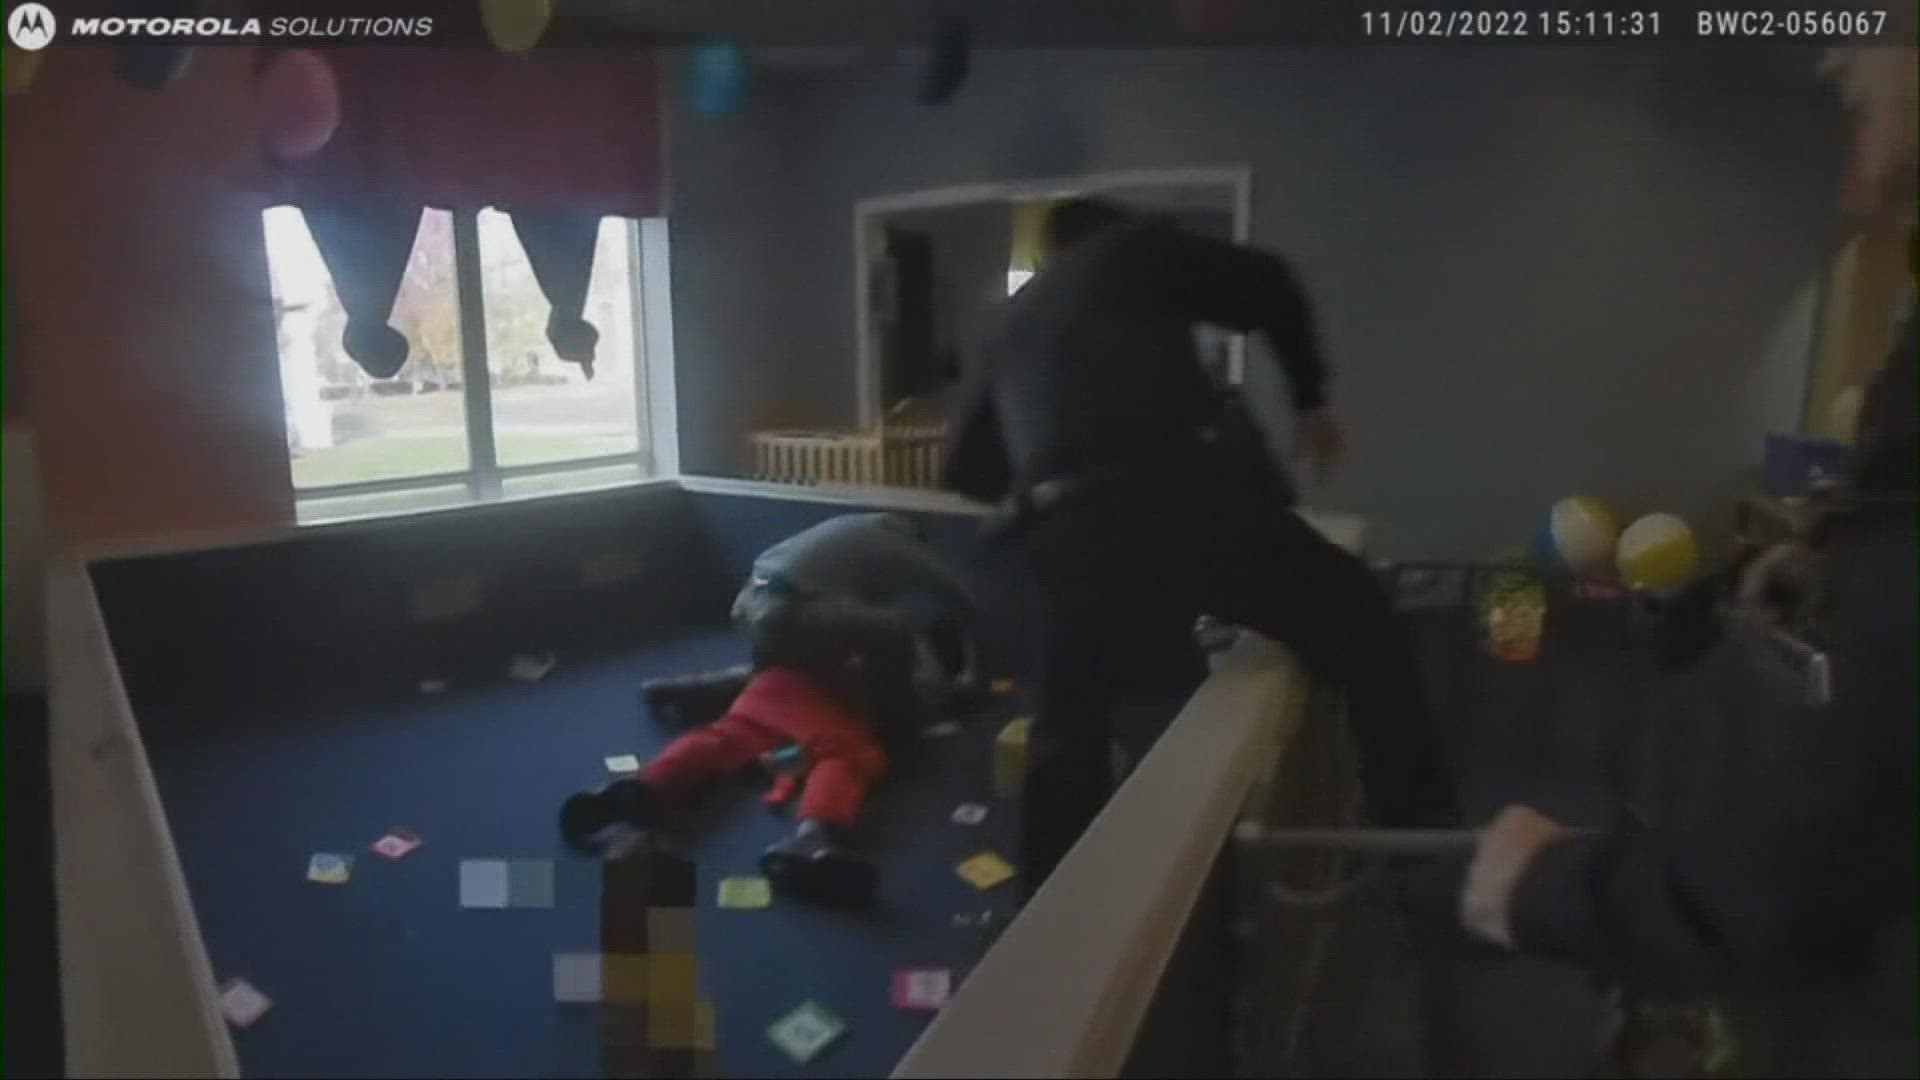 Police finally captured the suspect when he went into a classroom, tumbling into a playpen near several young children.